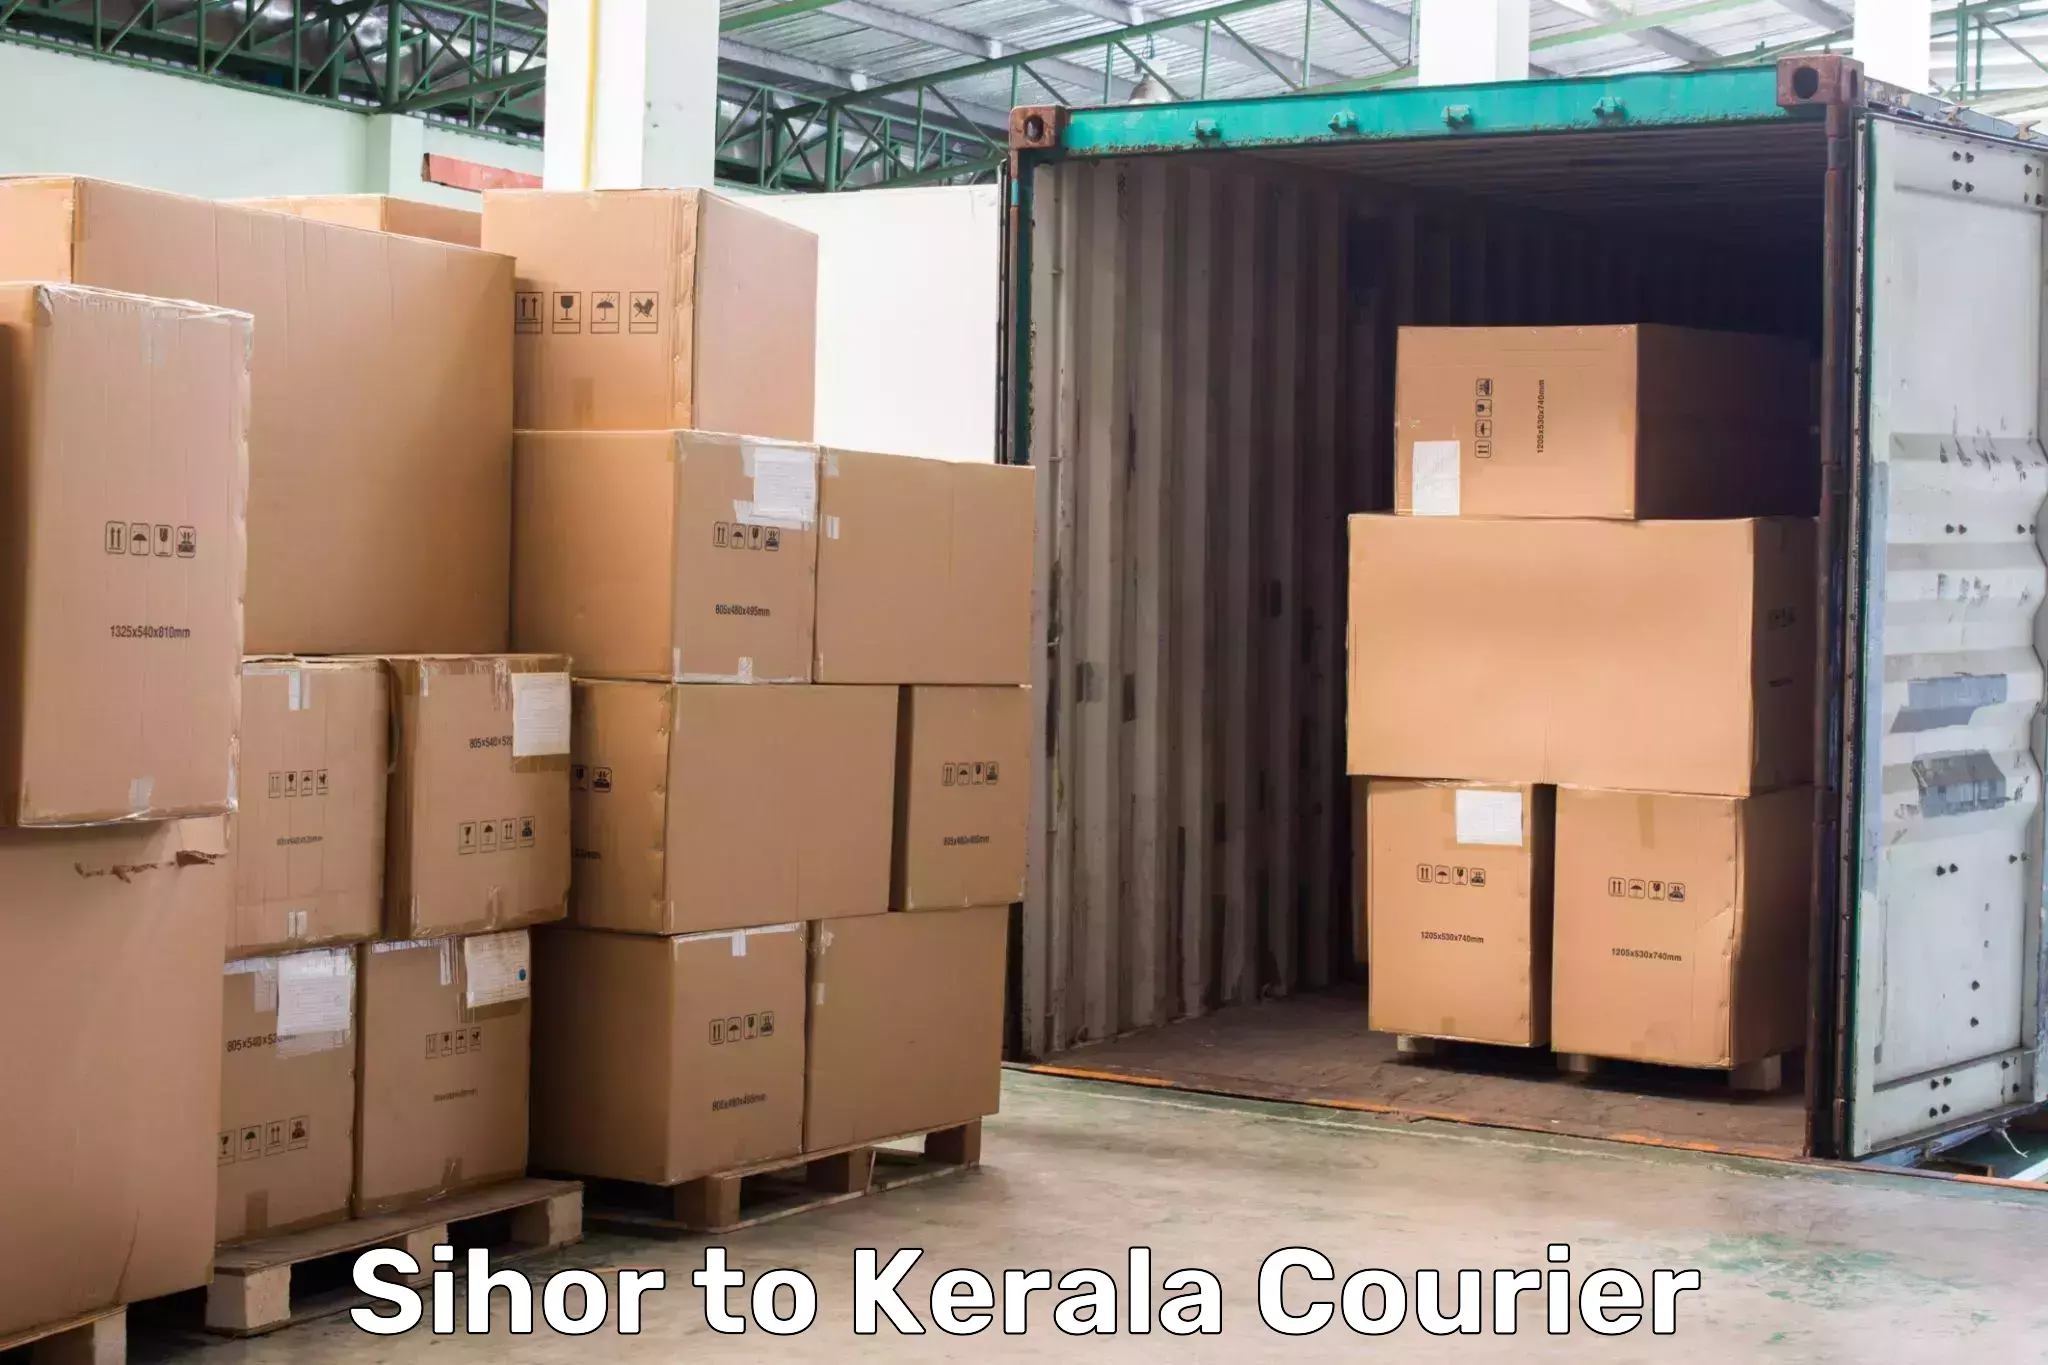 Local courier options Sihor to Nileshwar